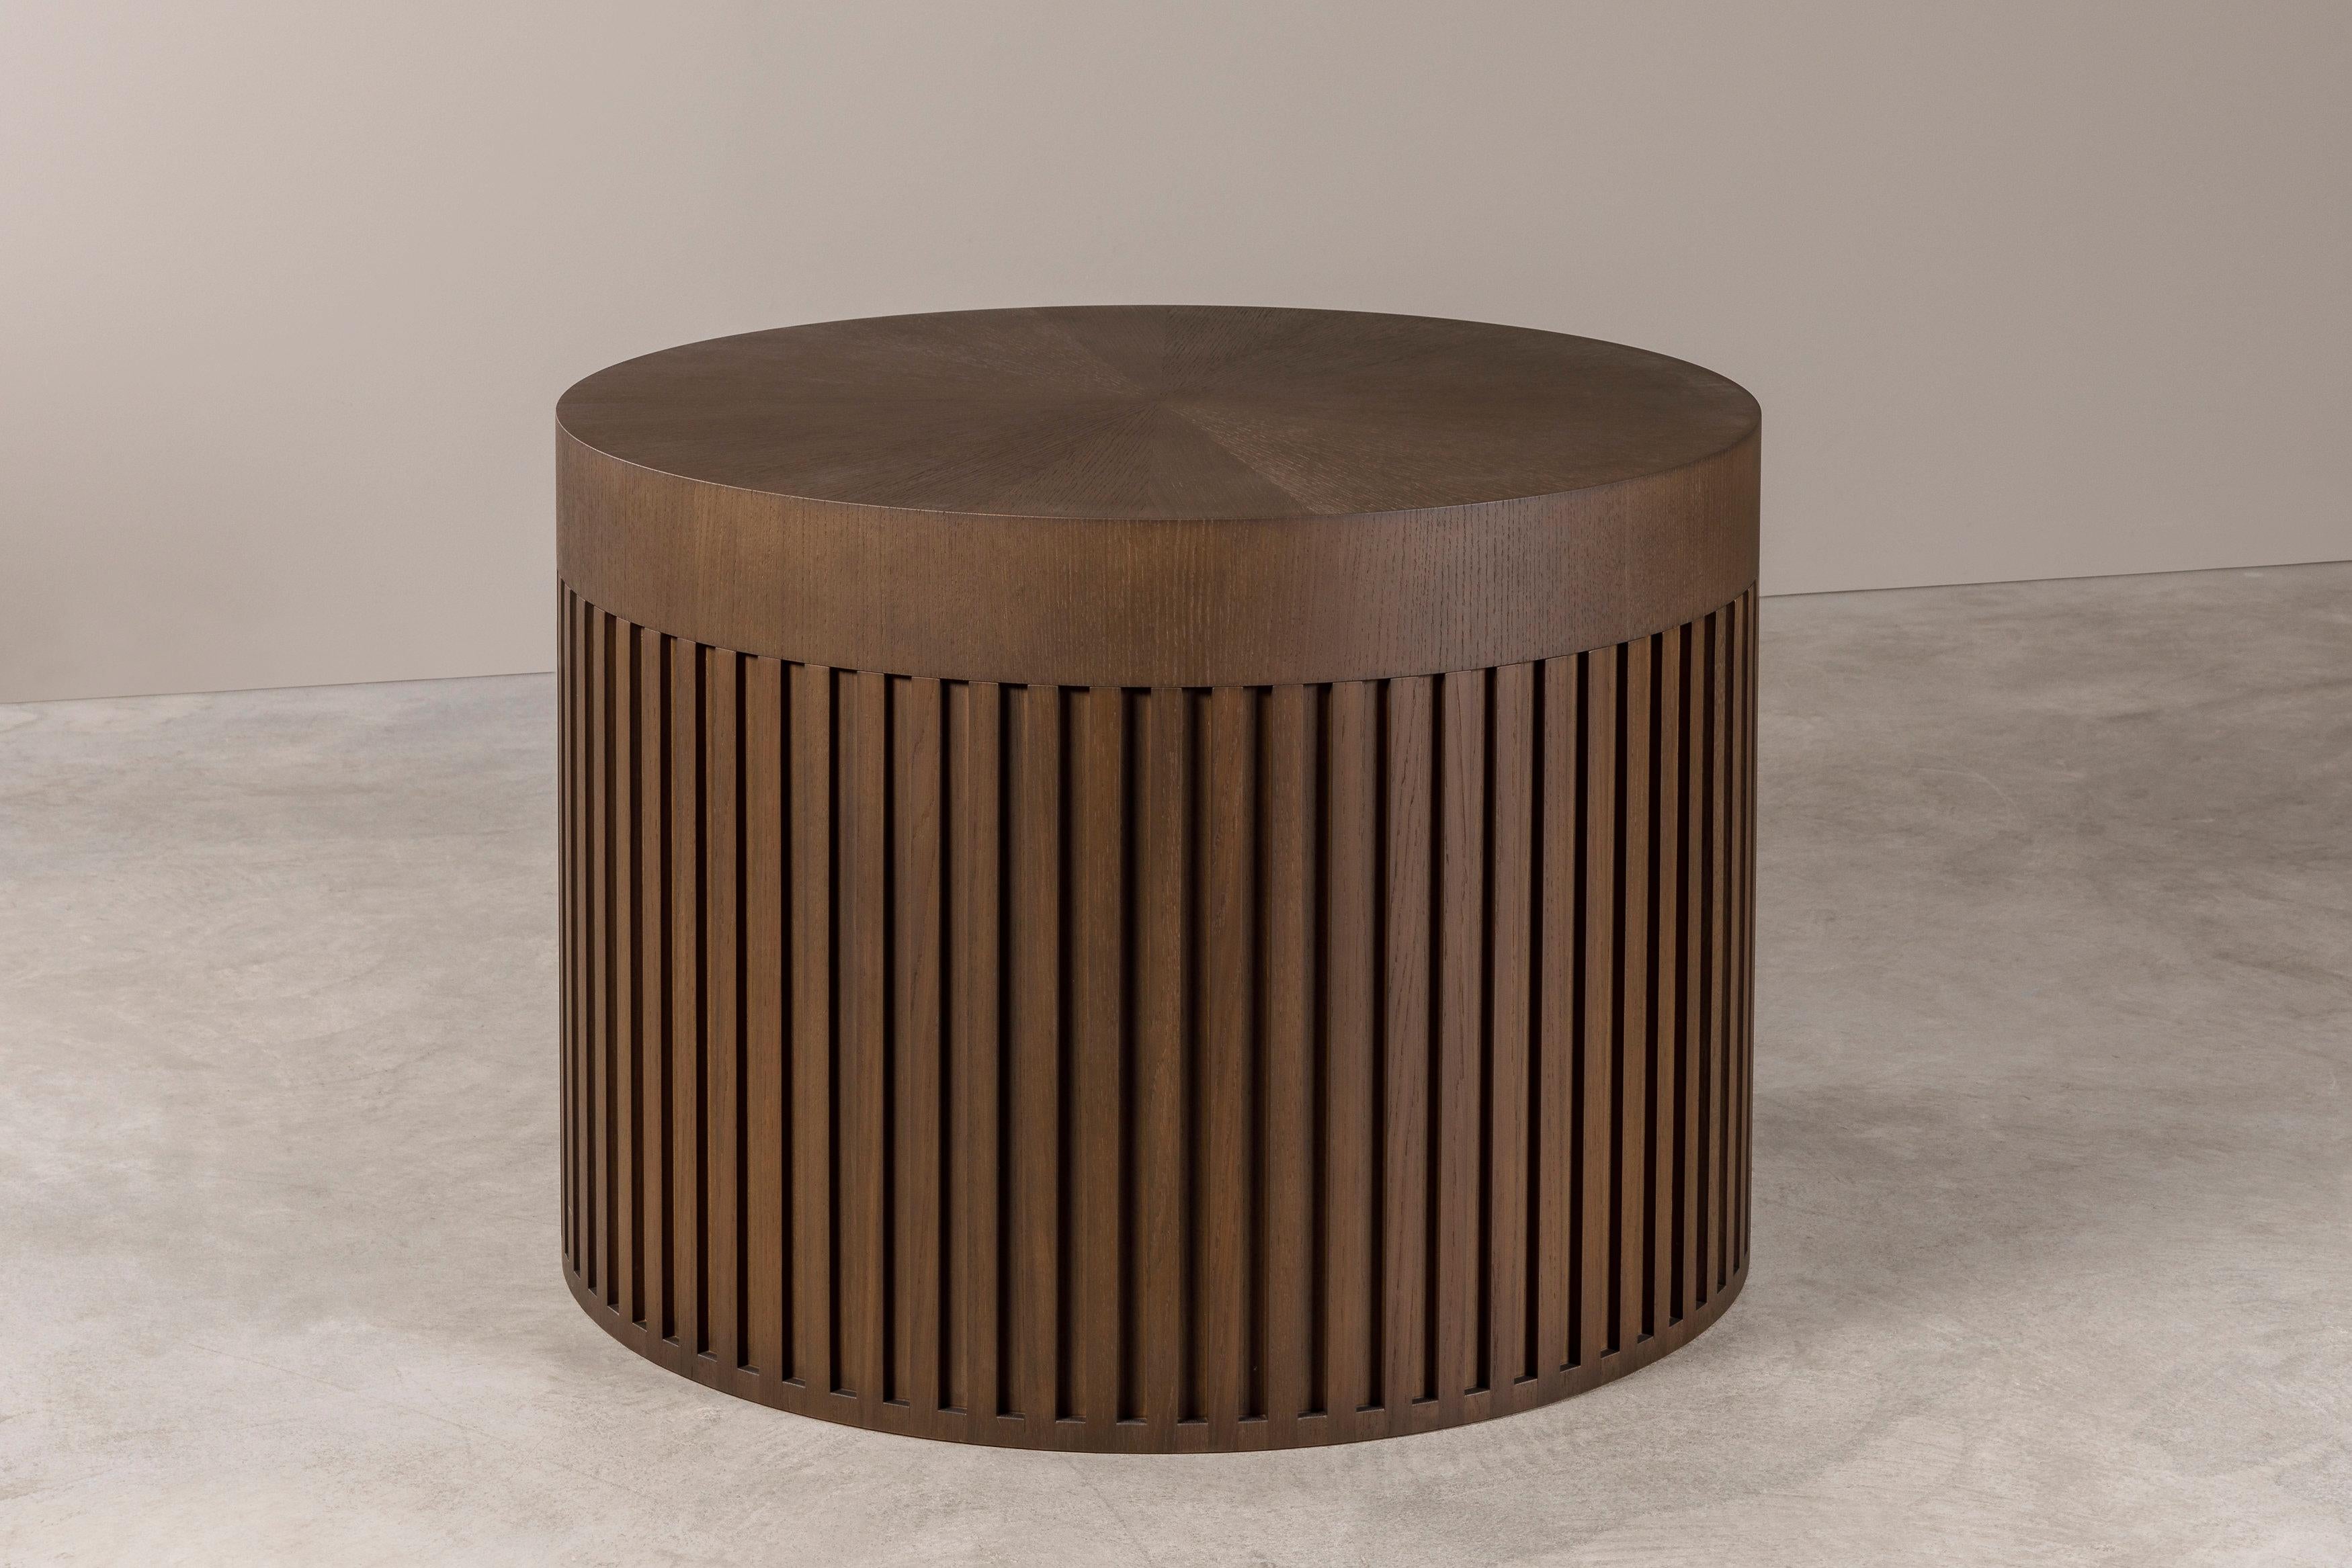 The Soleil pedestal table is made in matt varnished tinted oak, it’s created in 2023 by the Atelier Linné collective. This piece occupies a round shape, the base is in fluted oak, with a sun plating top.

Atelier Linné is a collective of